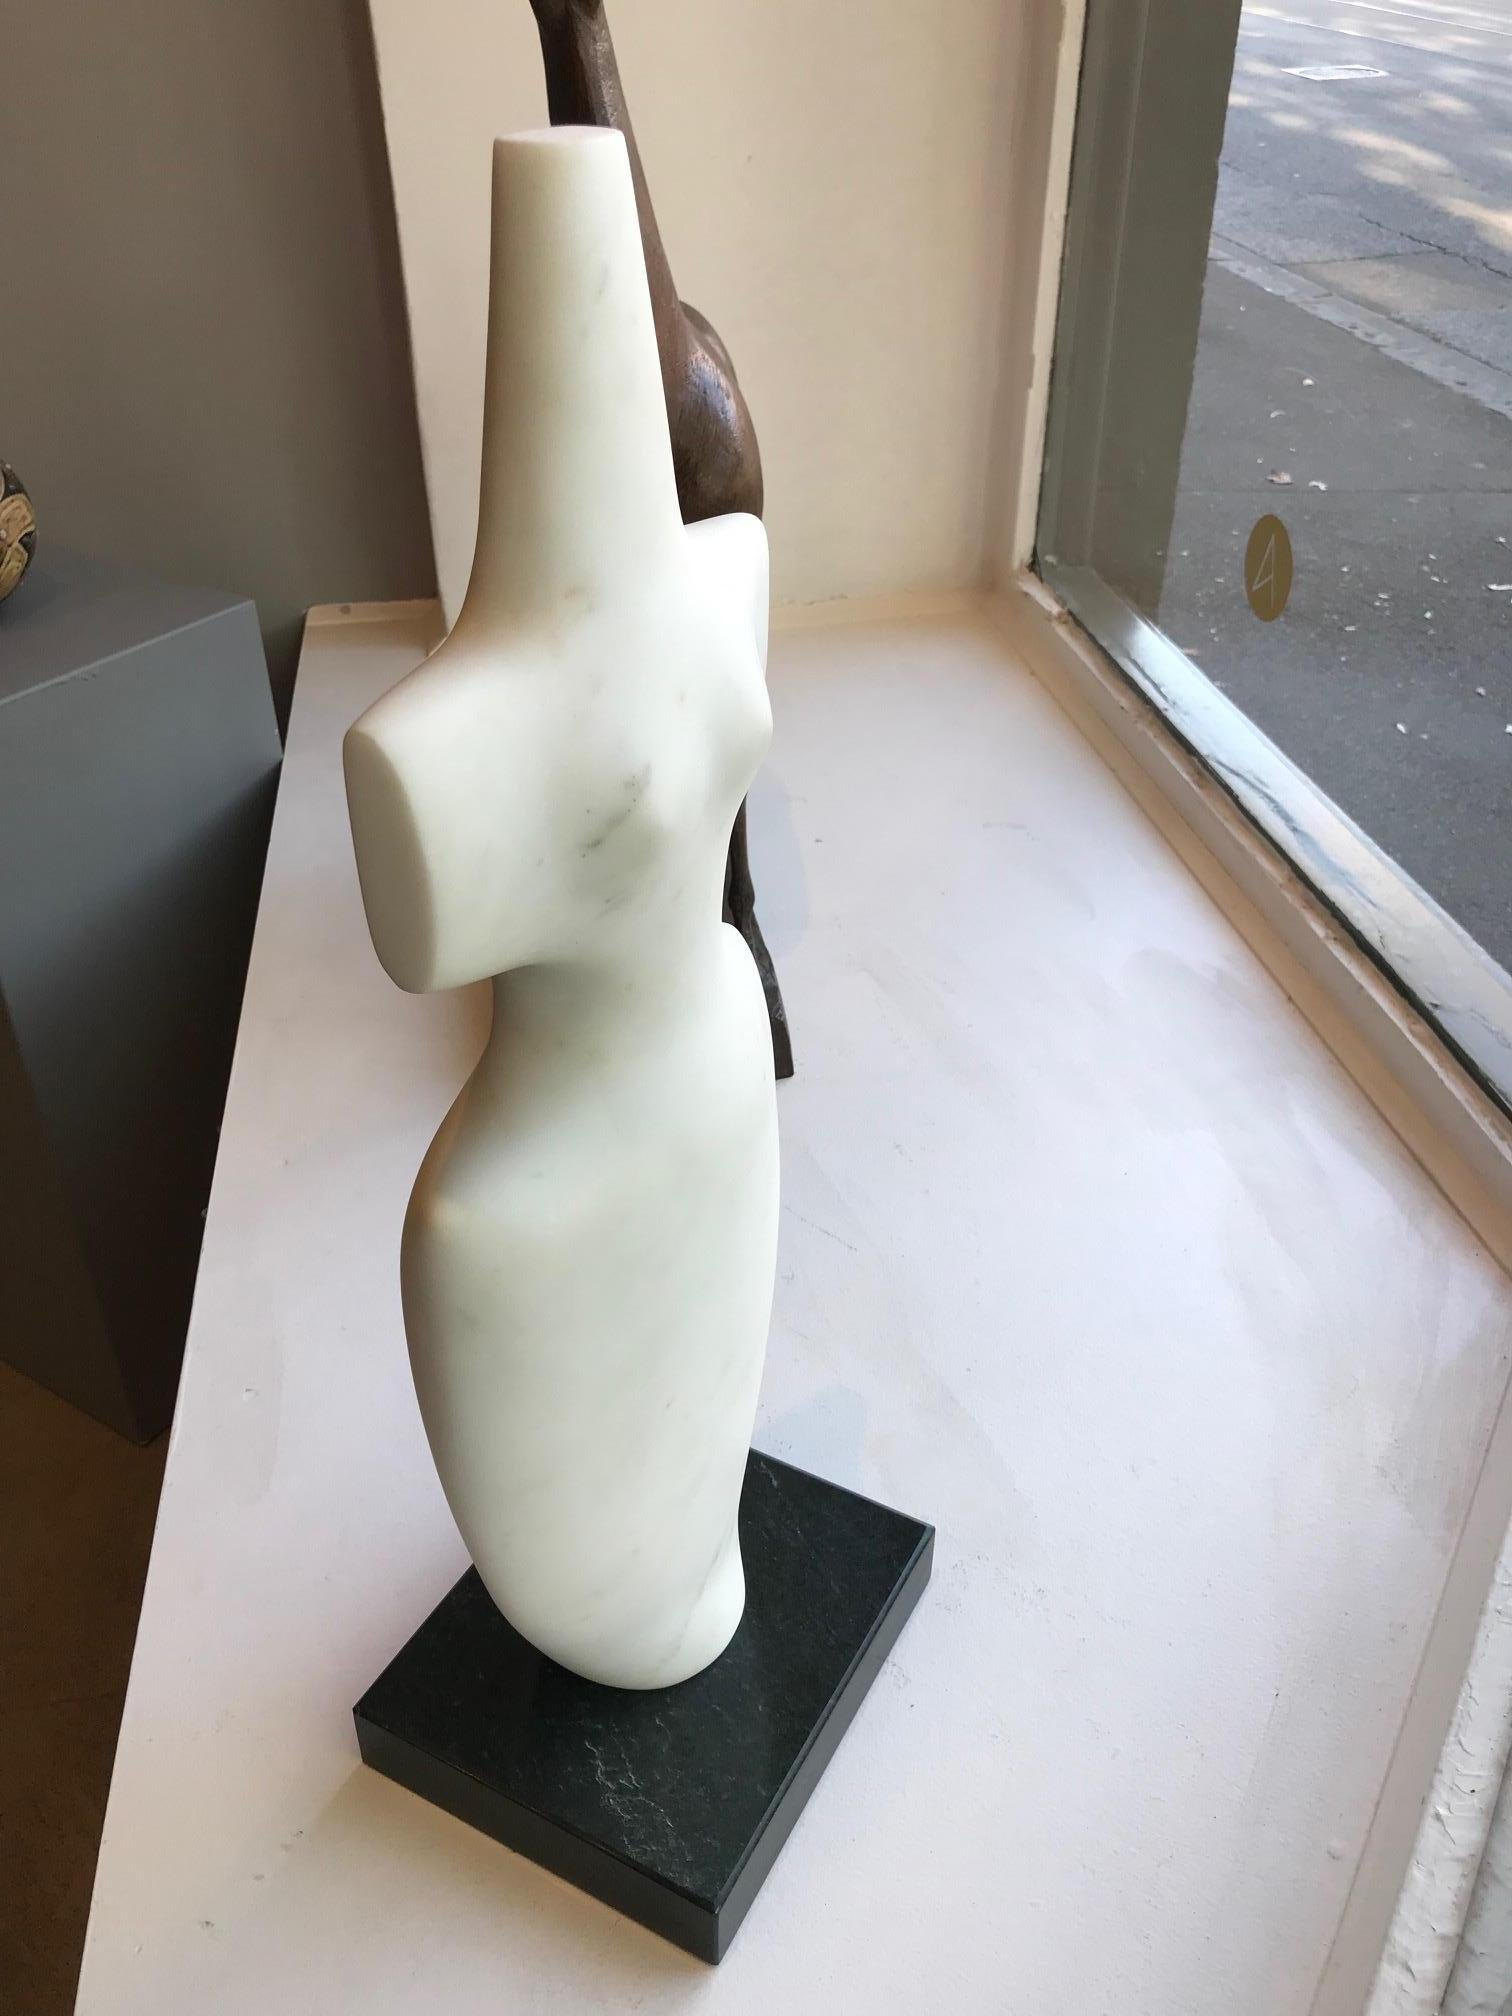 Goddess, 2013
In white marble, the feeling luminous, sensuous to touch, an ancient vessel inspiring a contemporary homage to life’s abundance- an ancient vessel inspiring a contemporary homage to life’s abundance.

Shona is a well known